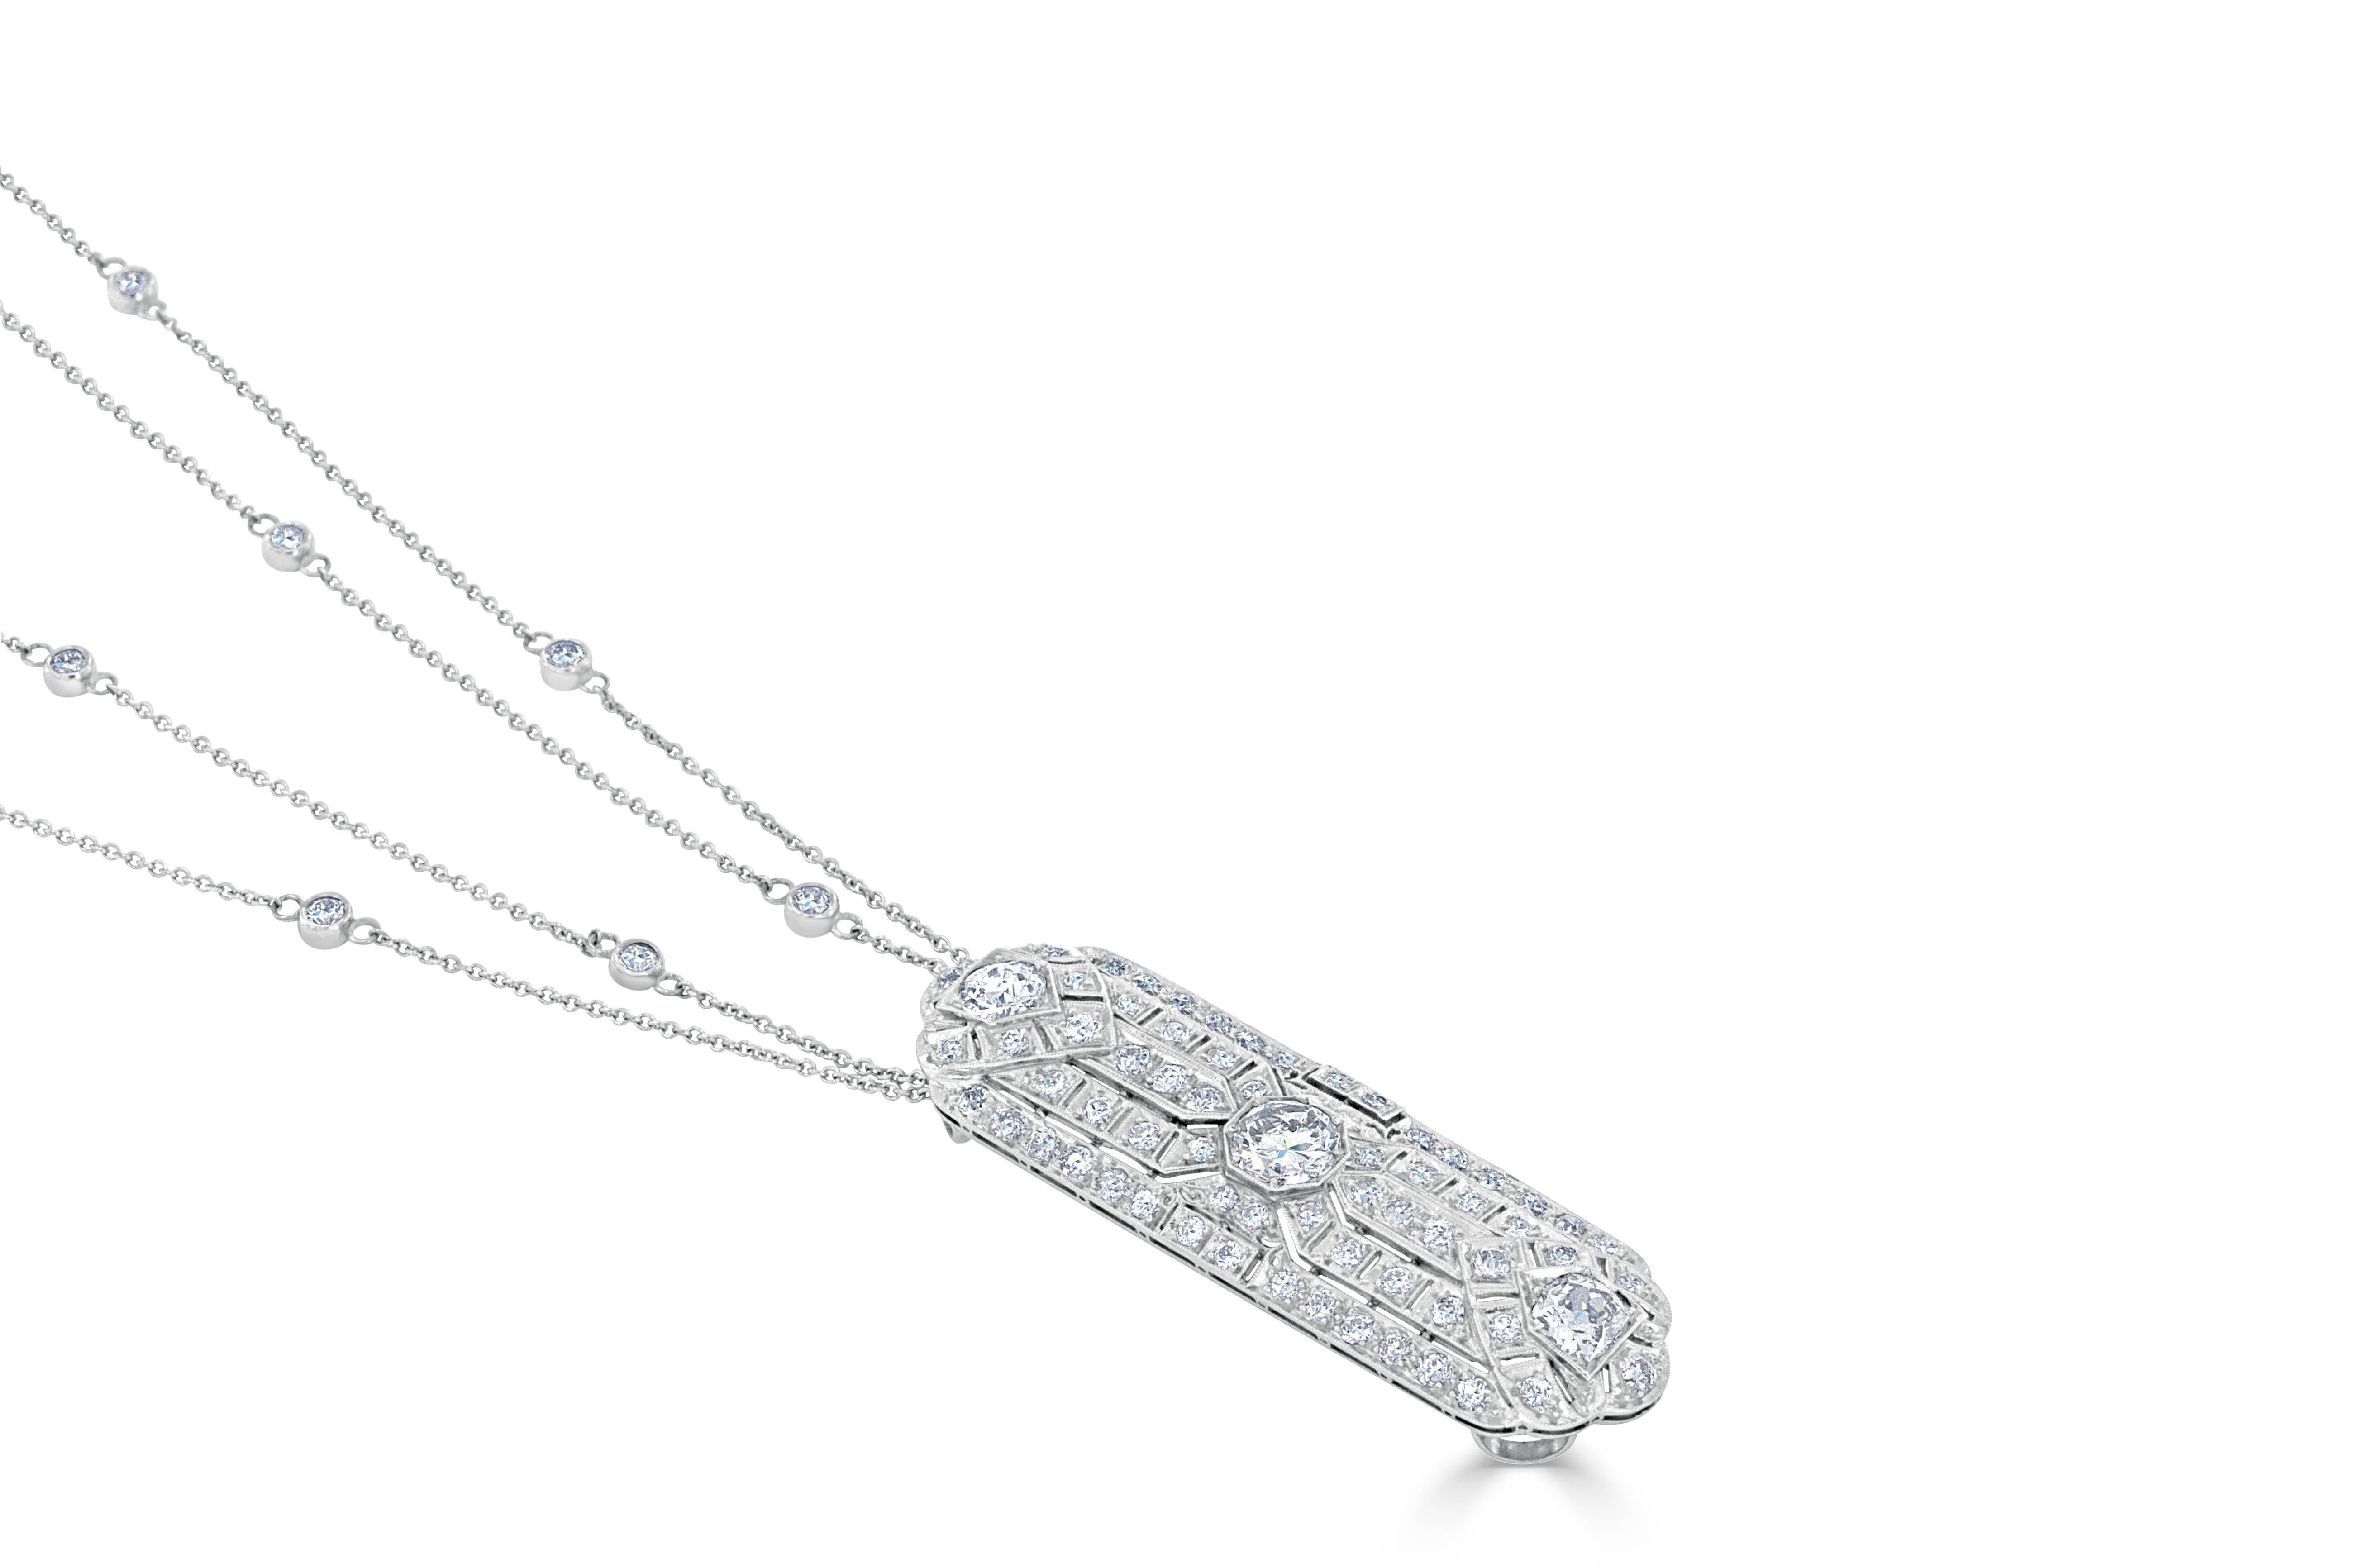 This stunning diamond pendant from the 1930’s features 69- Old European cut diamonds weighing 3.51 carats total, set in platinum. This rarefied piece also offers versatility, able to be worn vertically or horizontally. The pendant is on a new